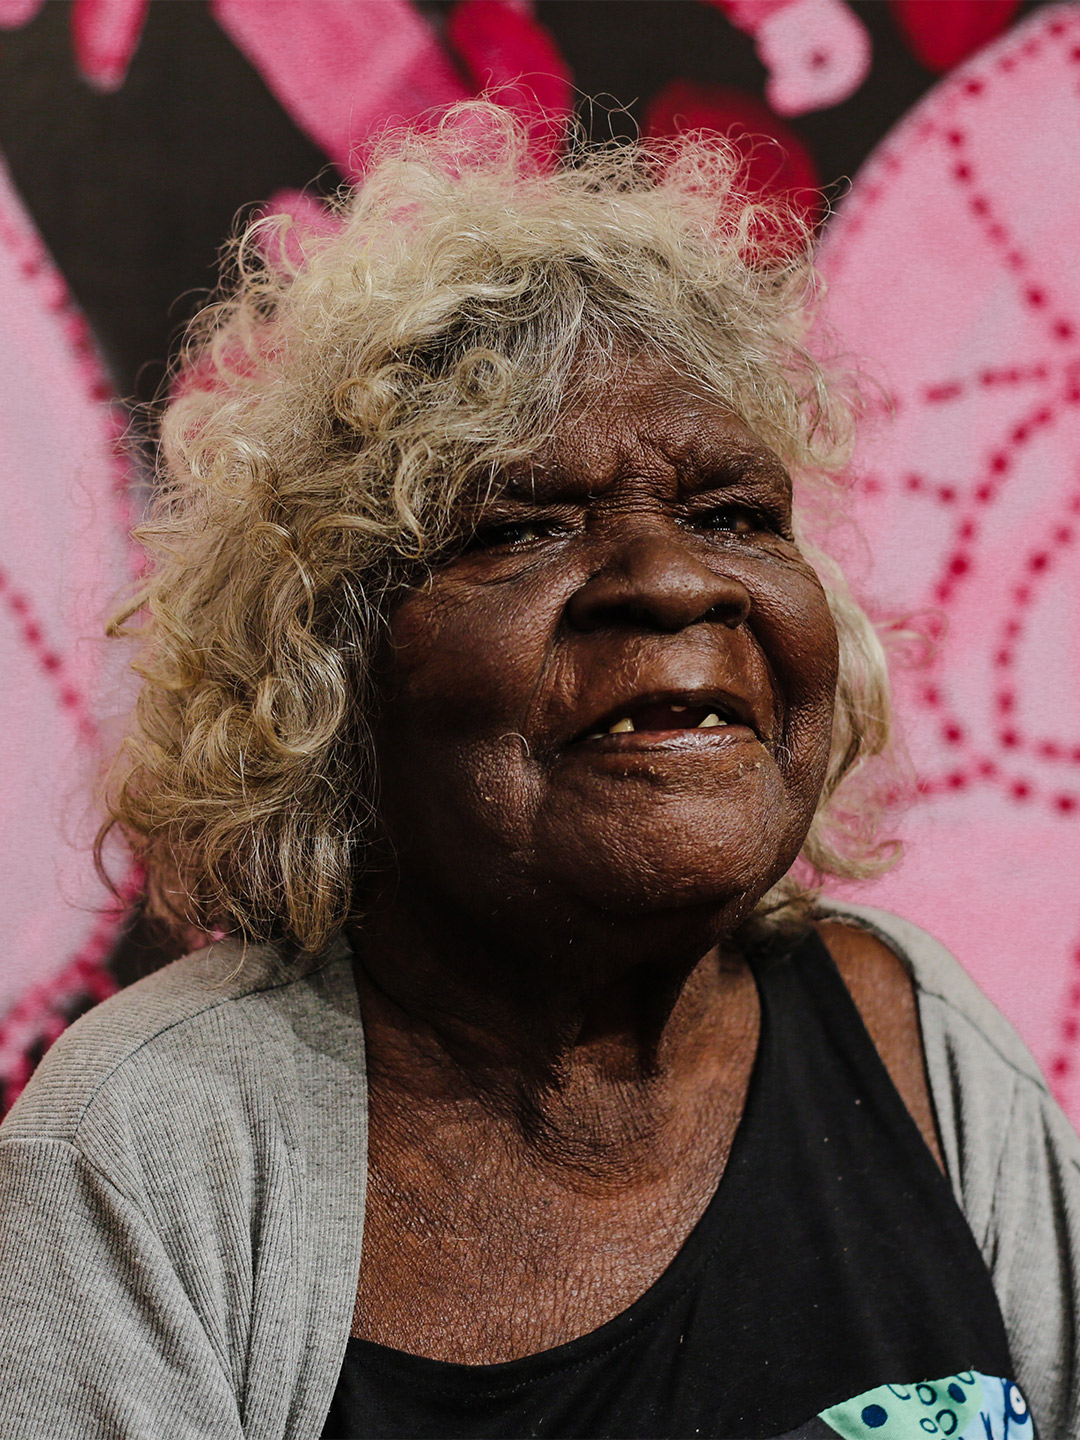 The National Gallery of Victoria (NGV) presents its latest exhibition, 'Bark Ladies: Eleven Artists from Yirrkala'